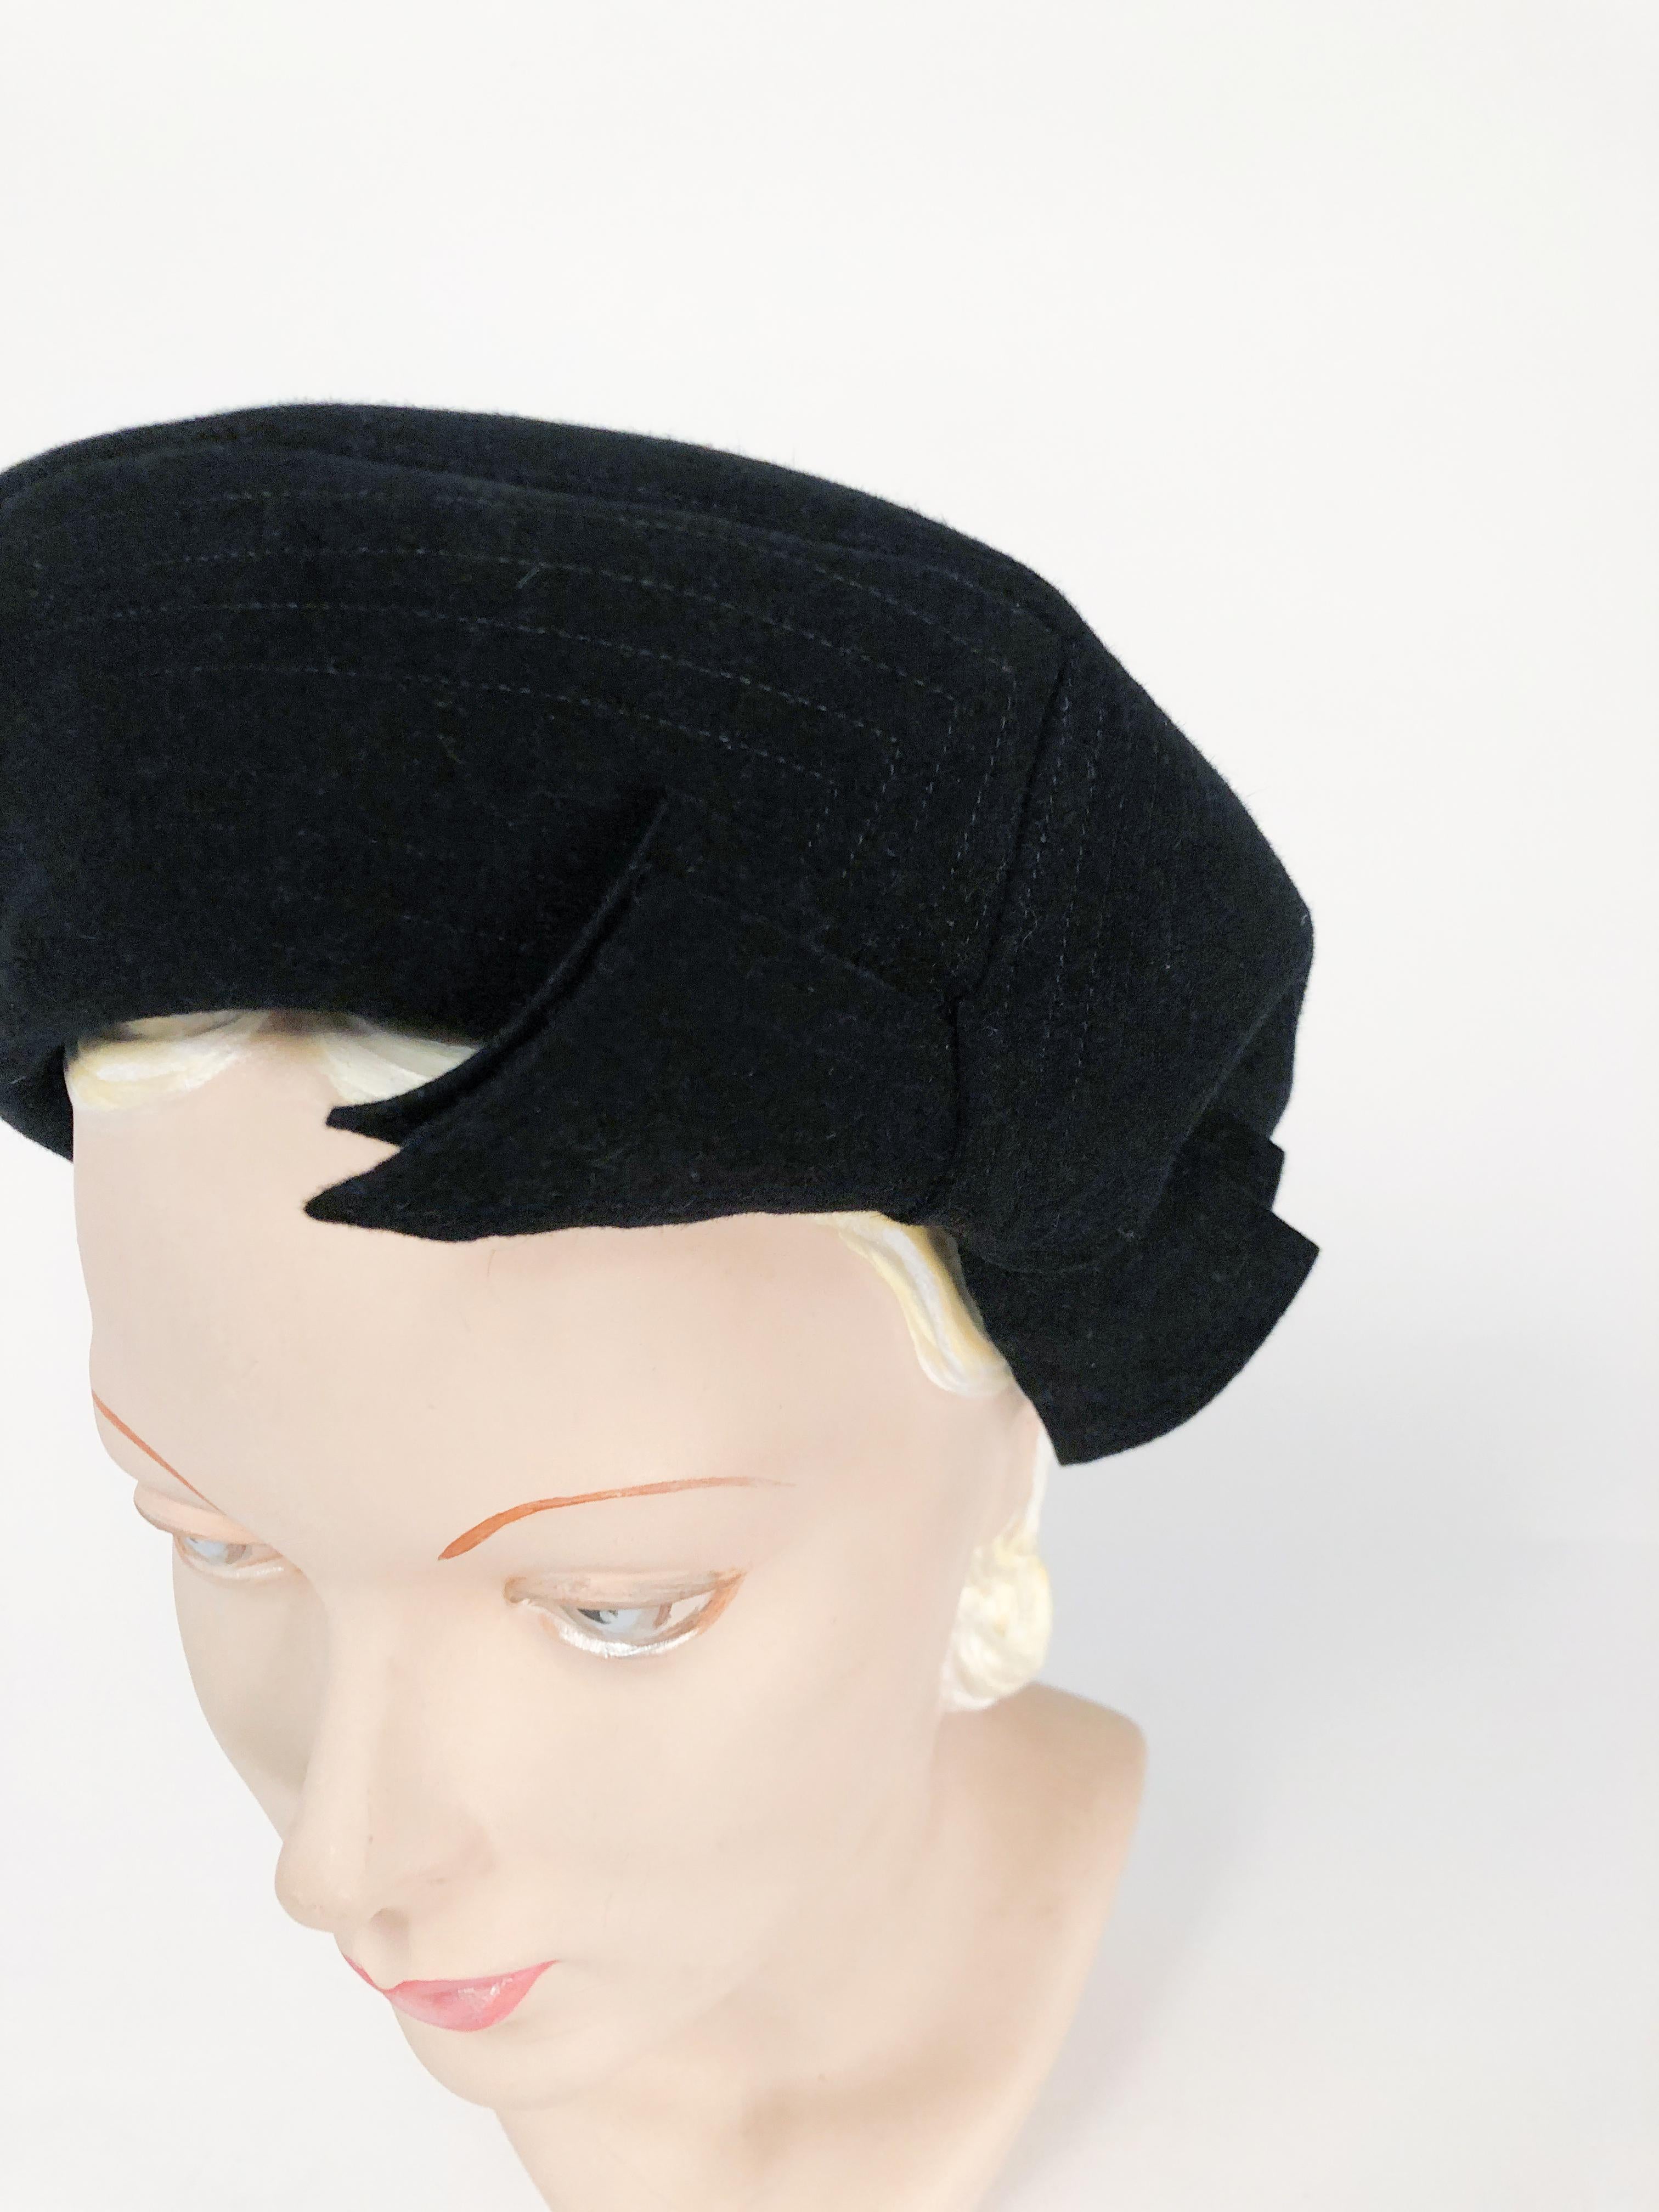 Women's 1940s Black Felt Hat with Double Bow and Top Stitch Pattern For Sale